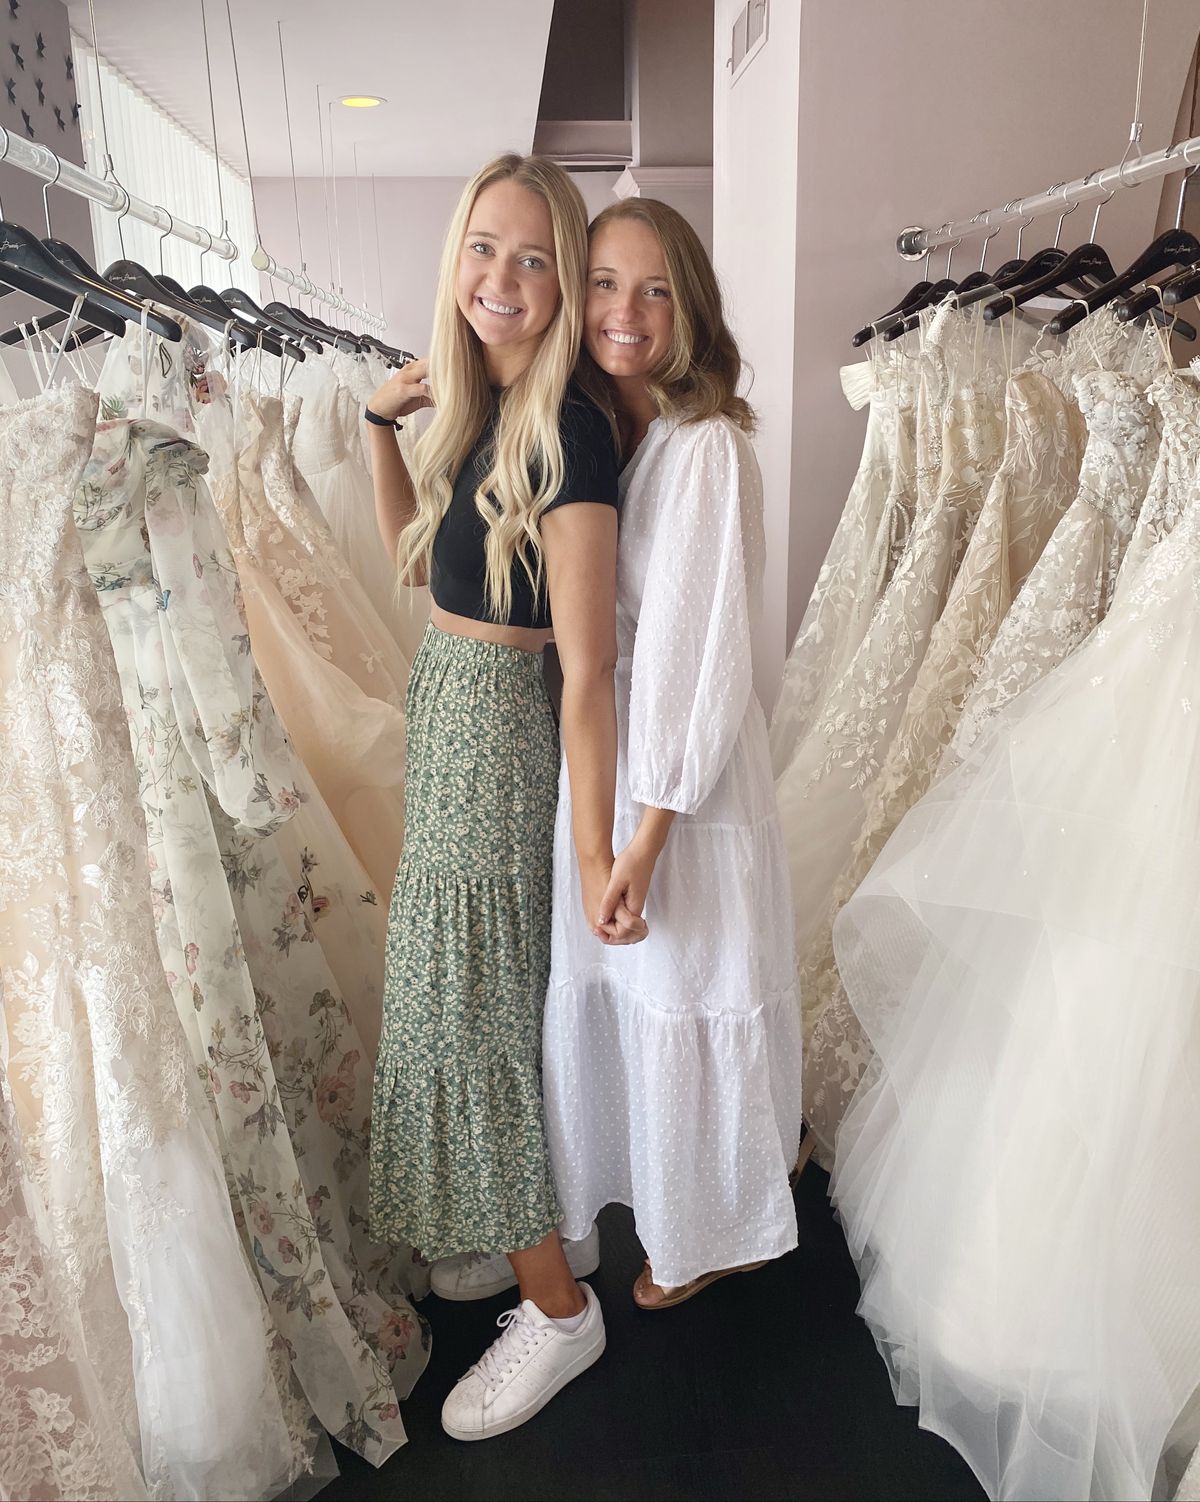 paige and alex drummond shop for alex's wedding dress in dallas, texas with their mom, ree drummond